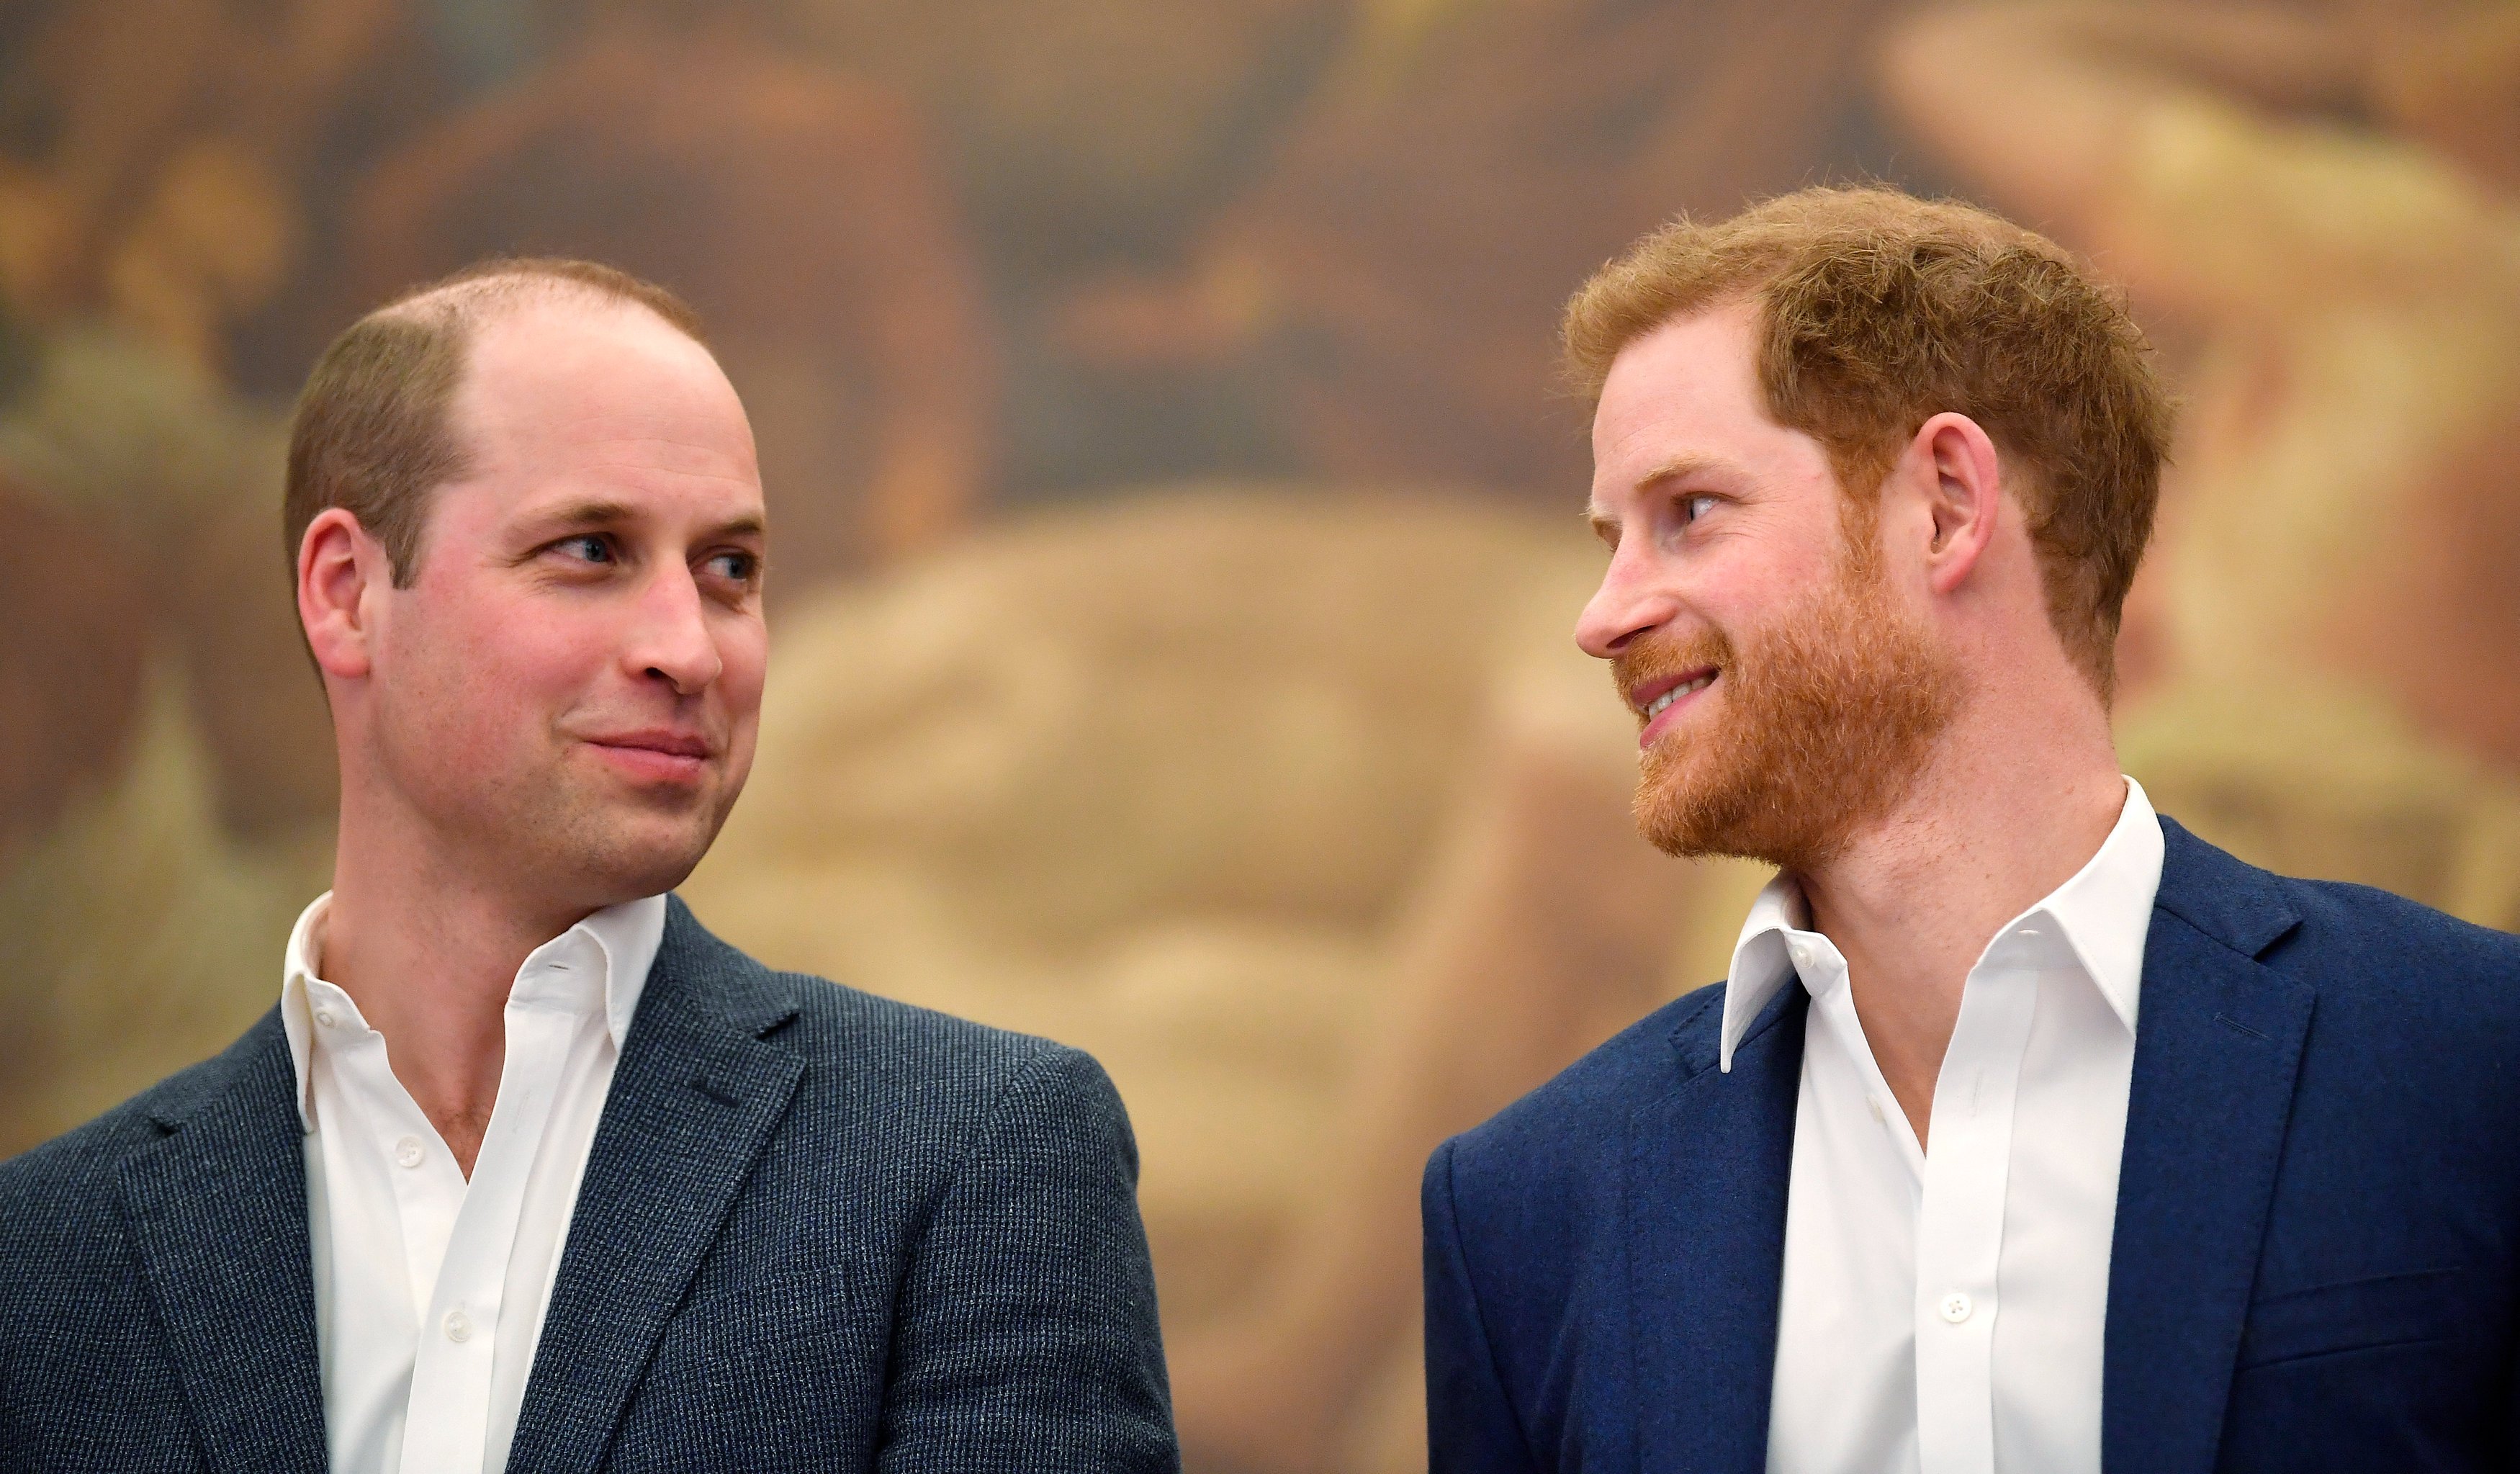 Prince William and Prince Harry during the opening of the Greenhouse Sports Centre on April 26, 2018 in London, United Kingdom. | Source: Getty Images